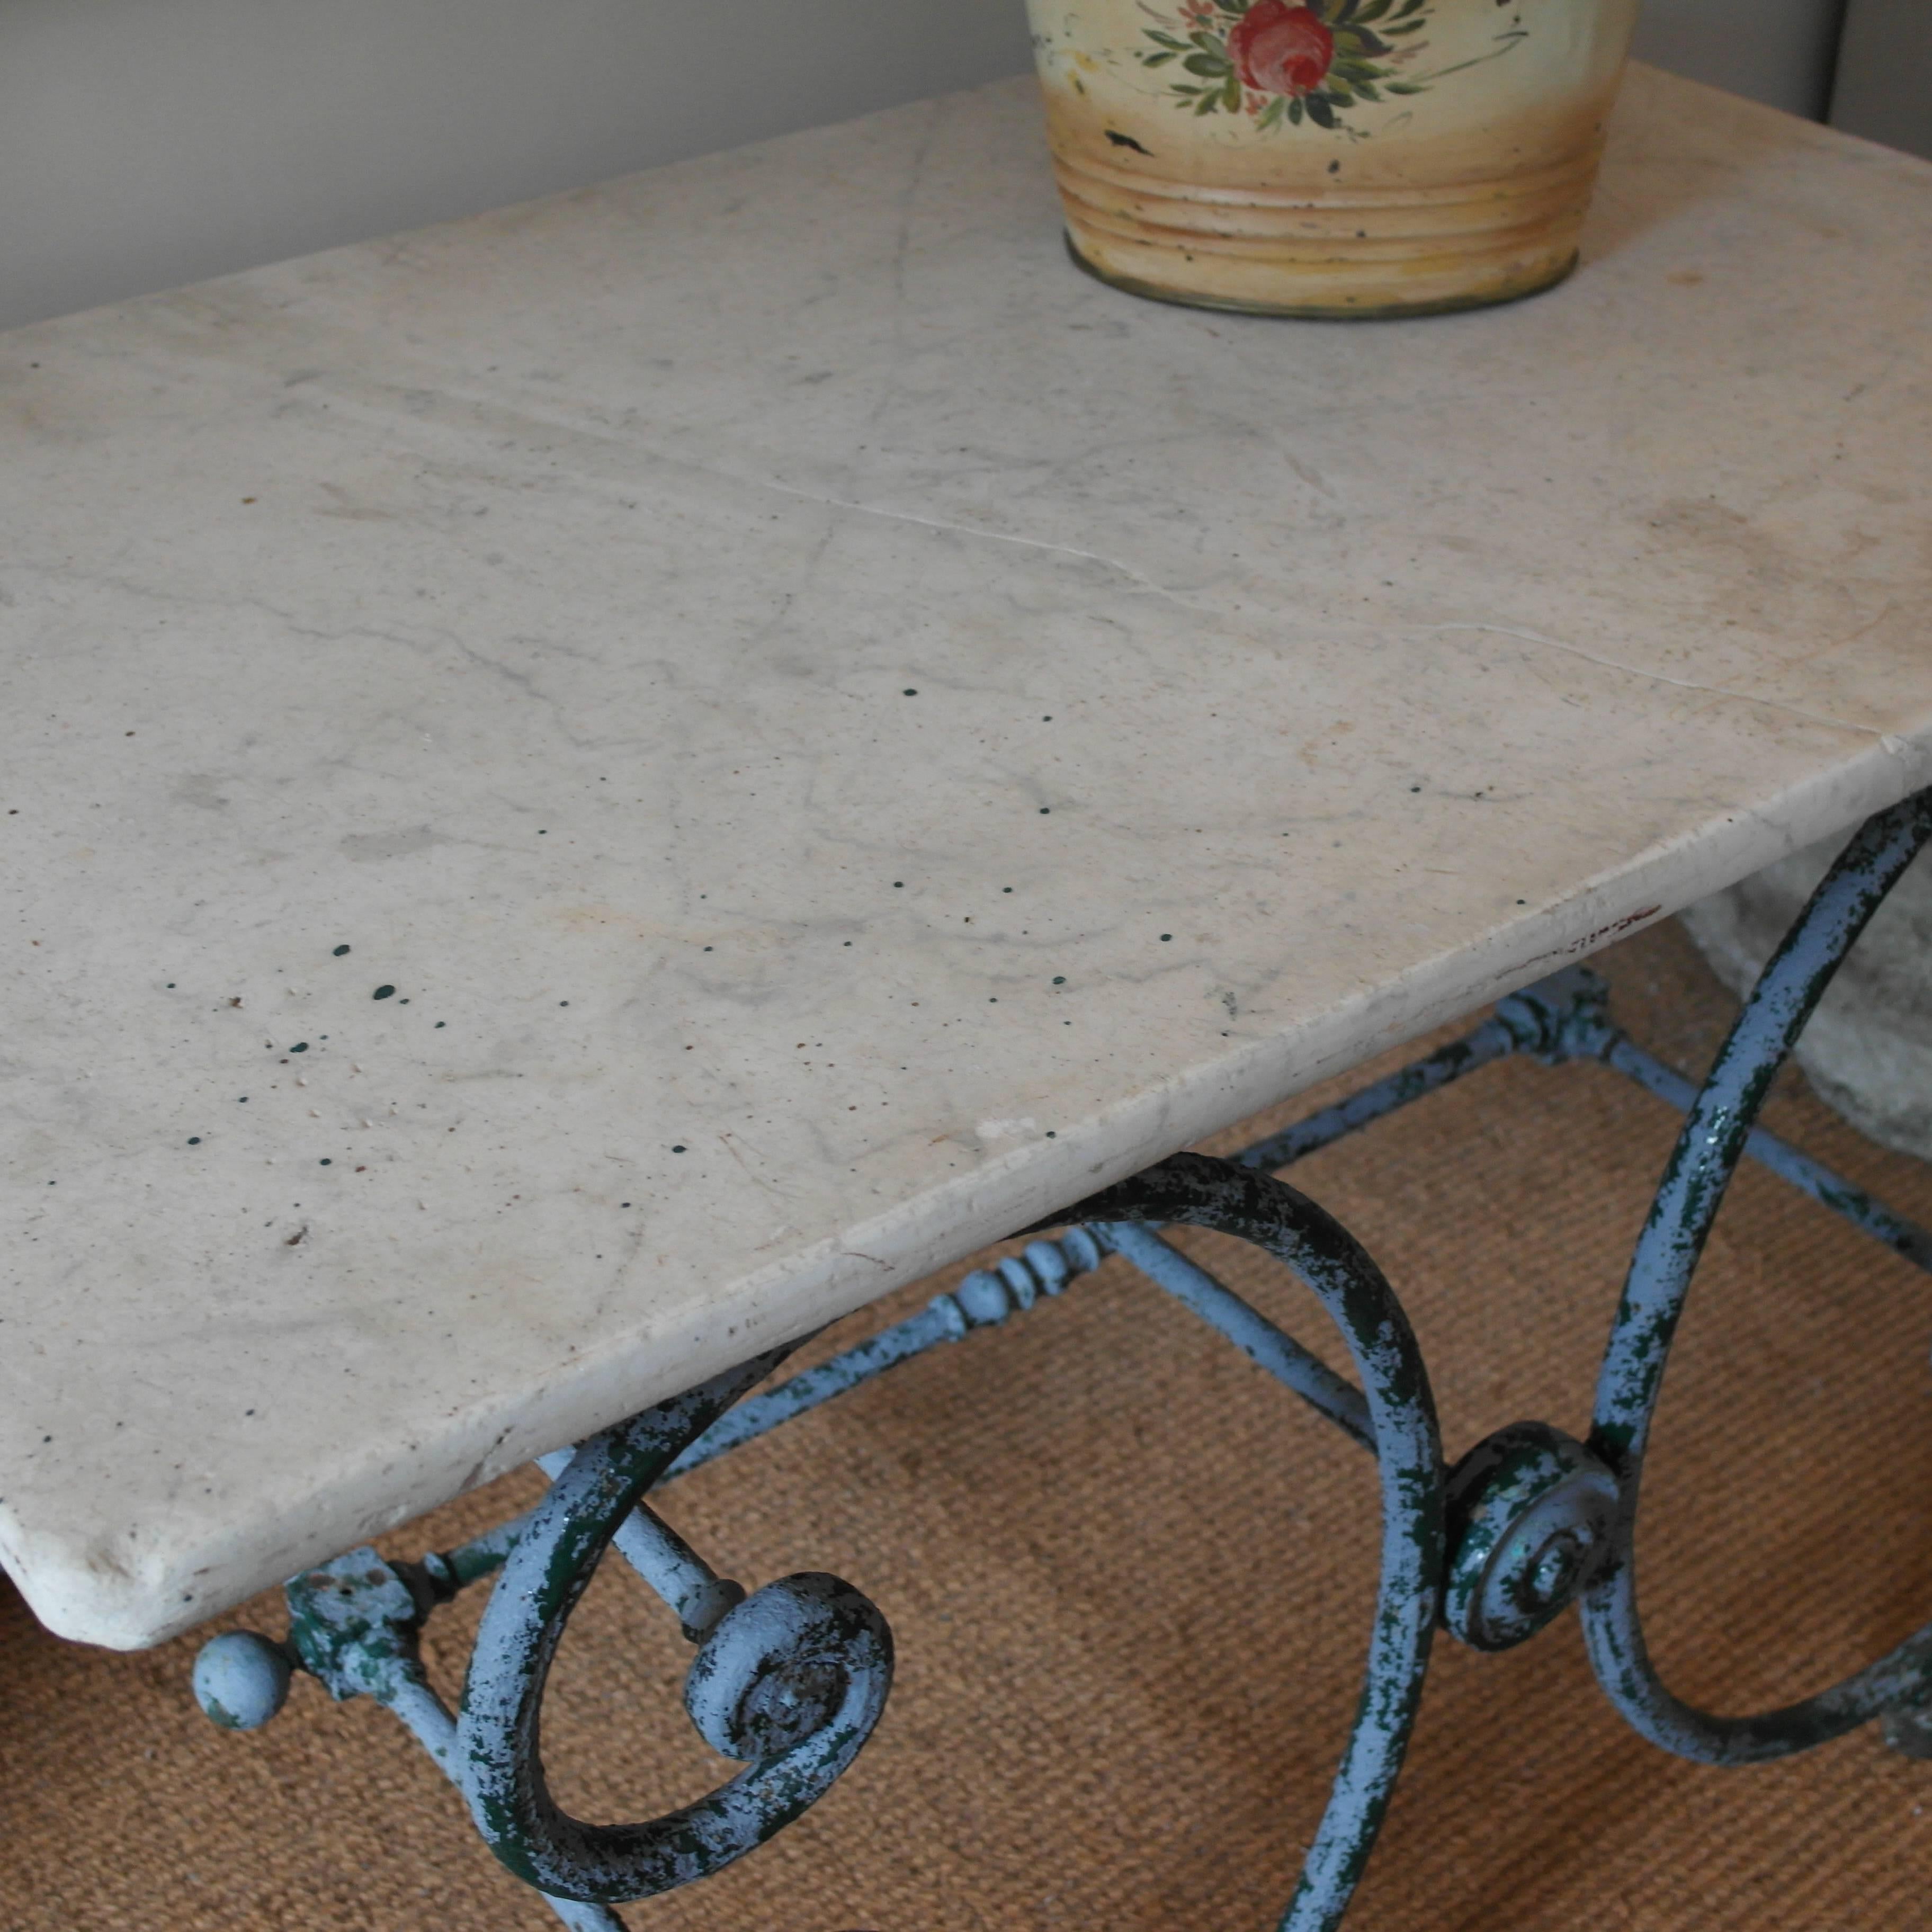 French 19th Century Patisserie Table with original marble top In Distressed Condition For Sale In Warminster, Wiltshire